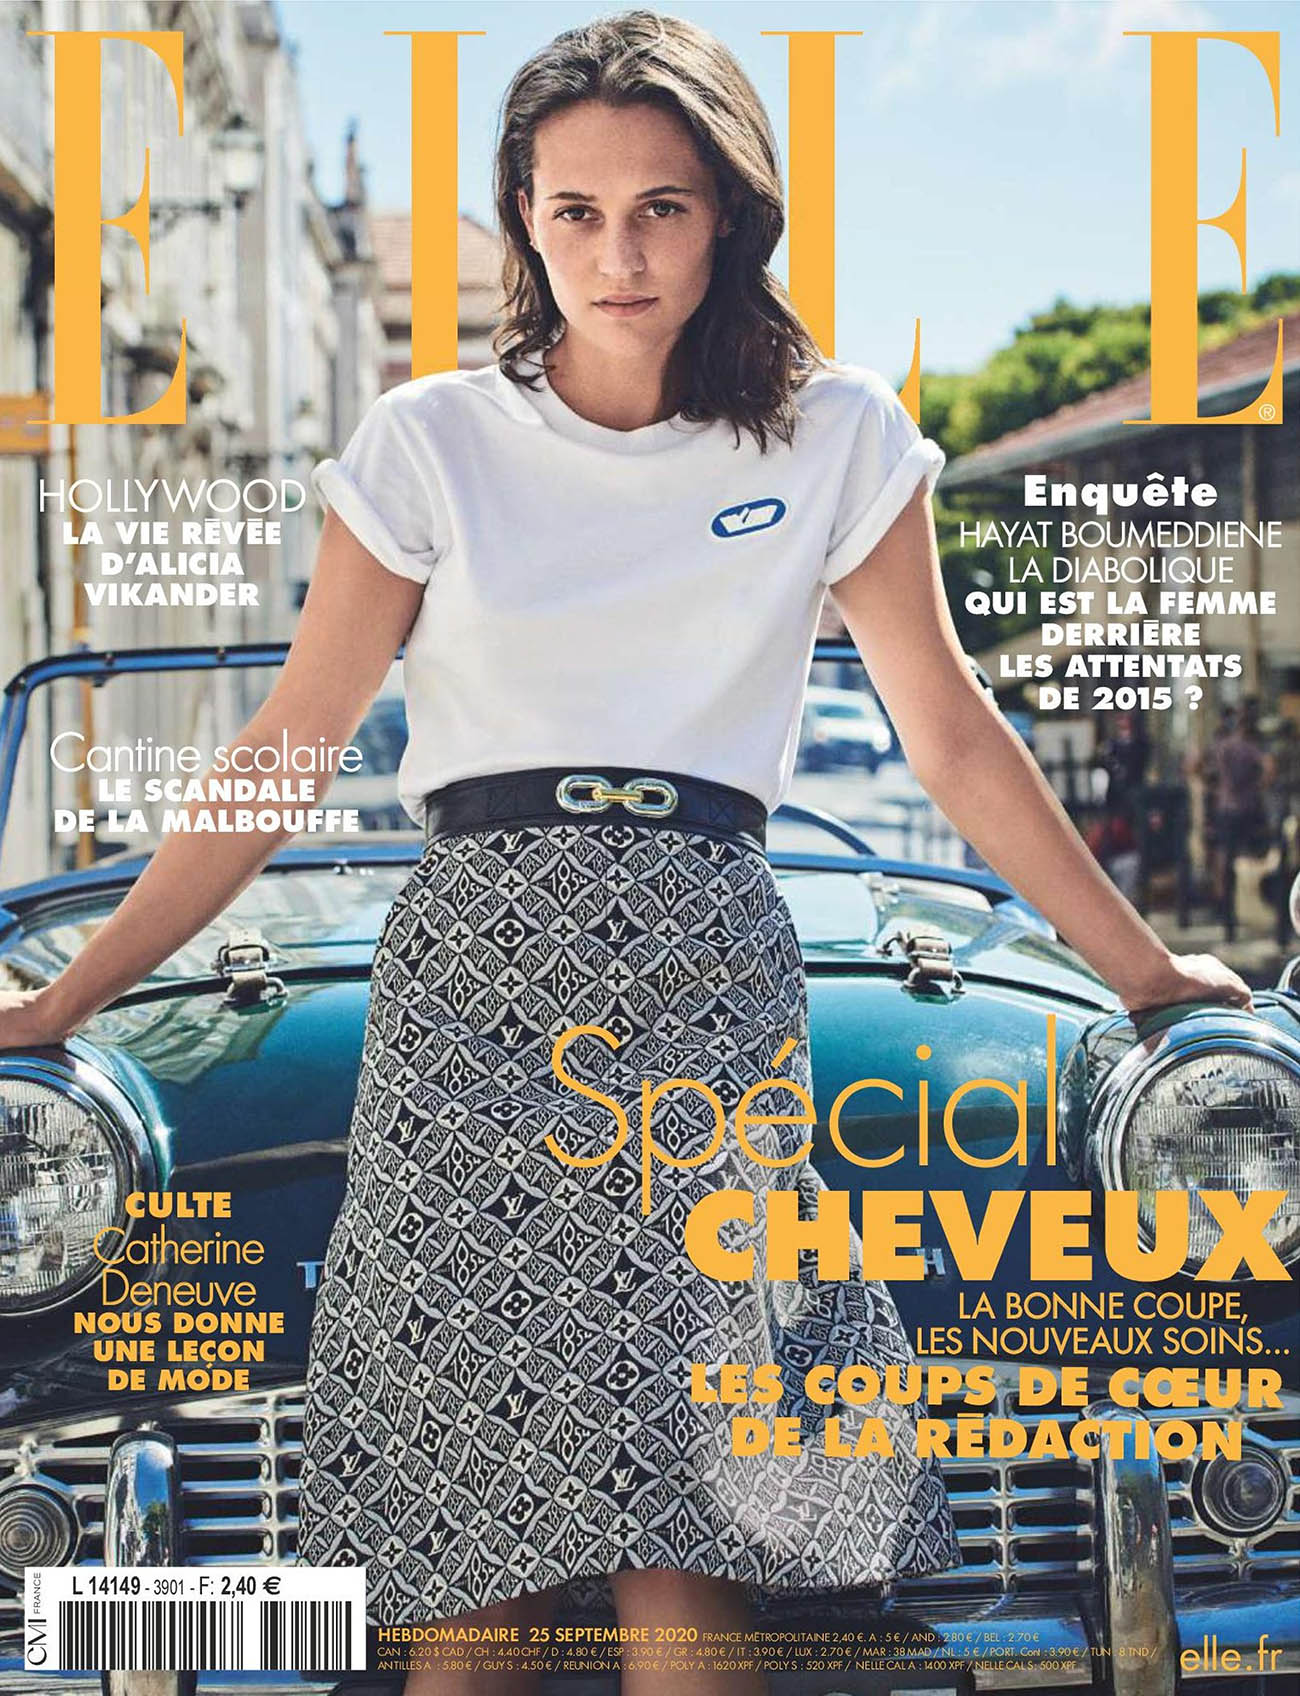 Alicia Vikander covers Elle France September 25th, 2020 by Matthew Brookes